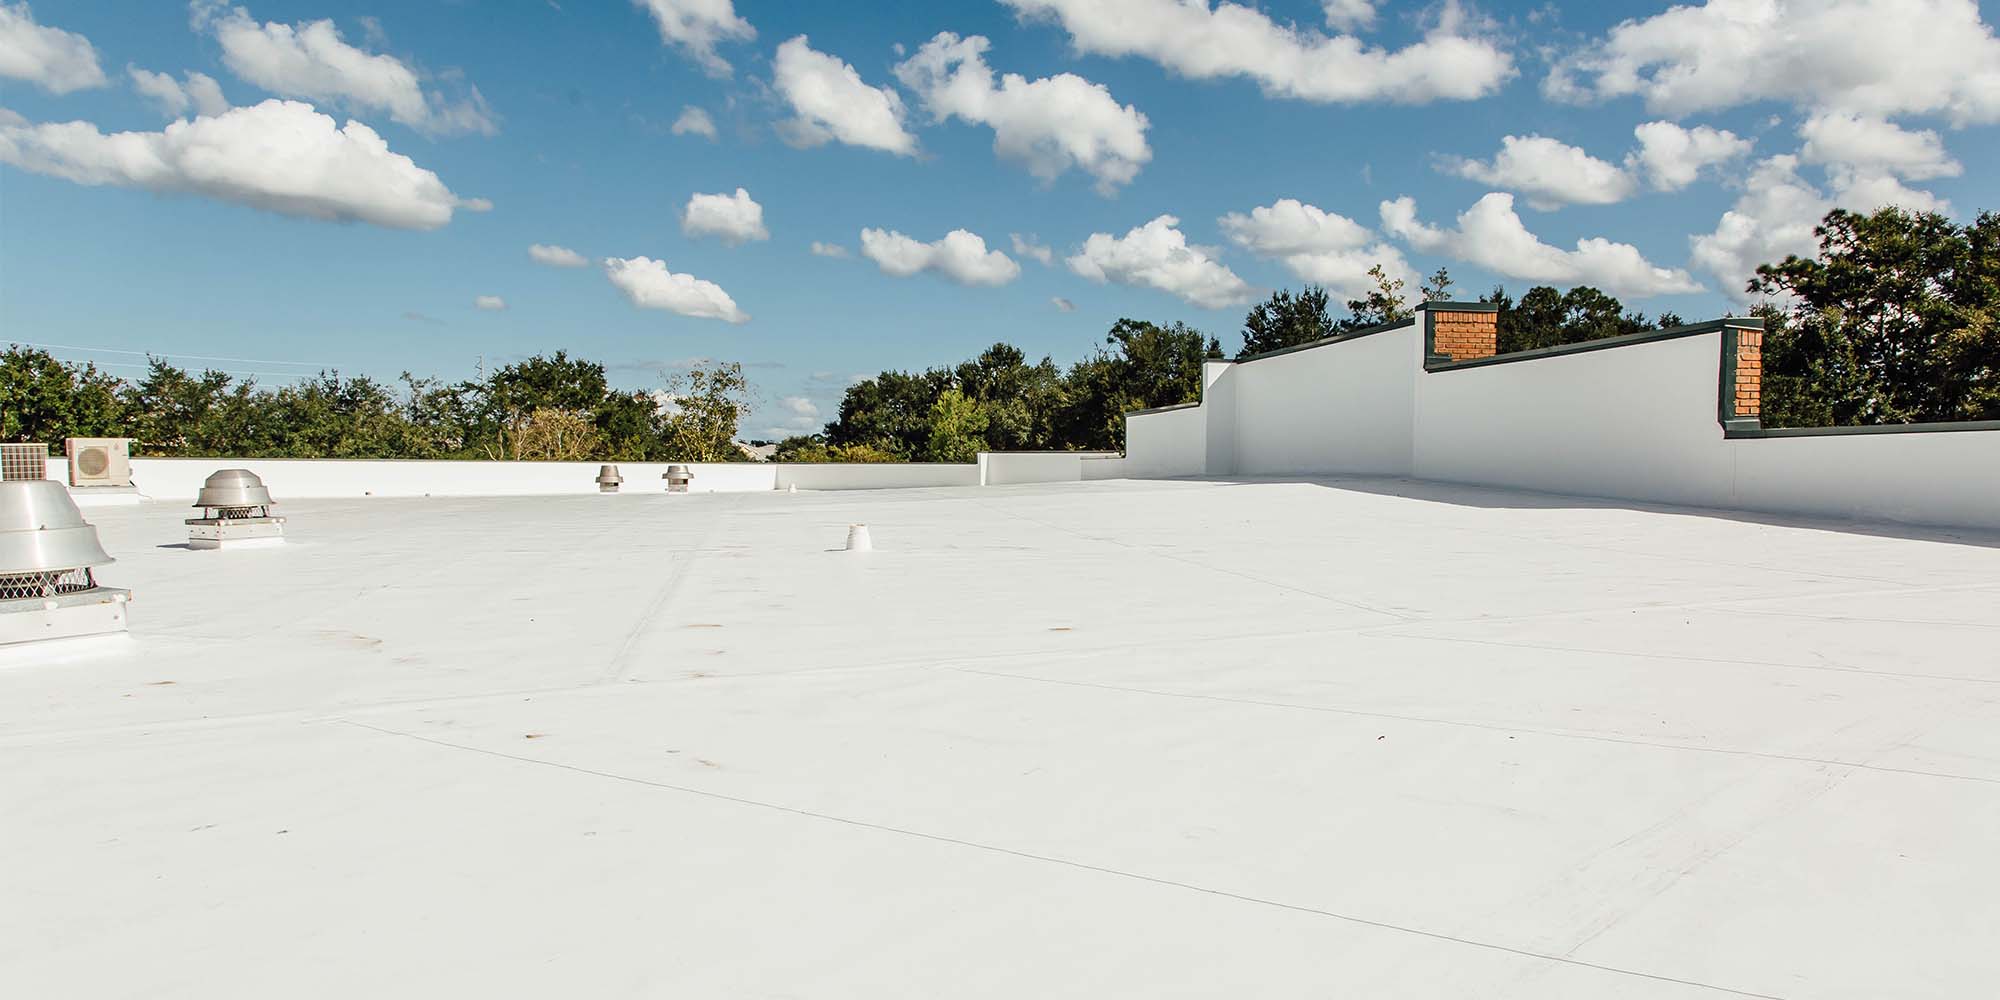 TPO and PVC Commercial Roofing Systems: Which is Right For Me?